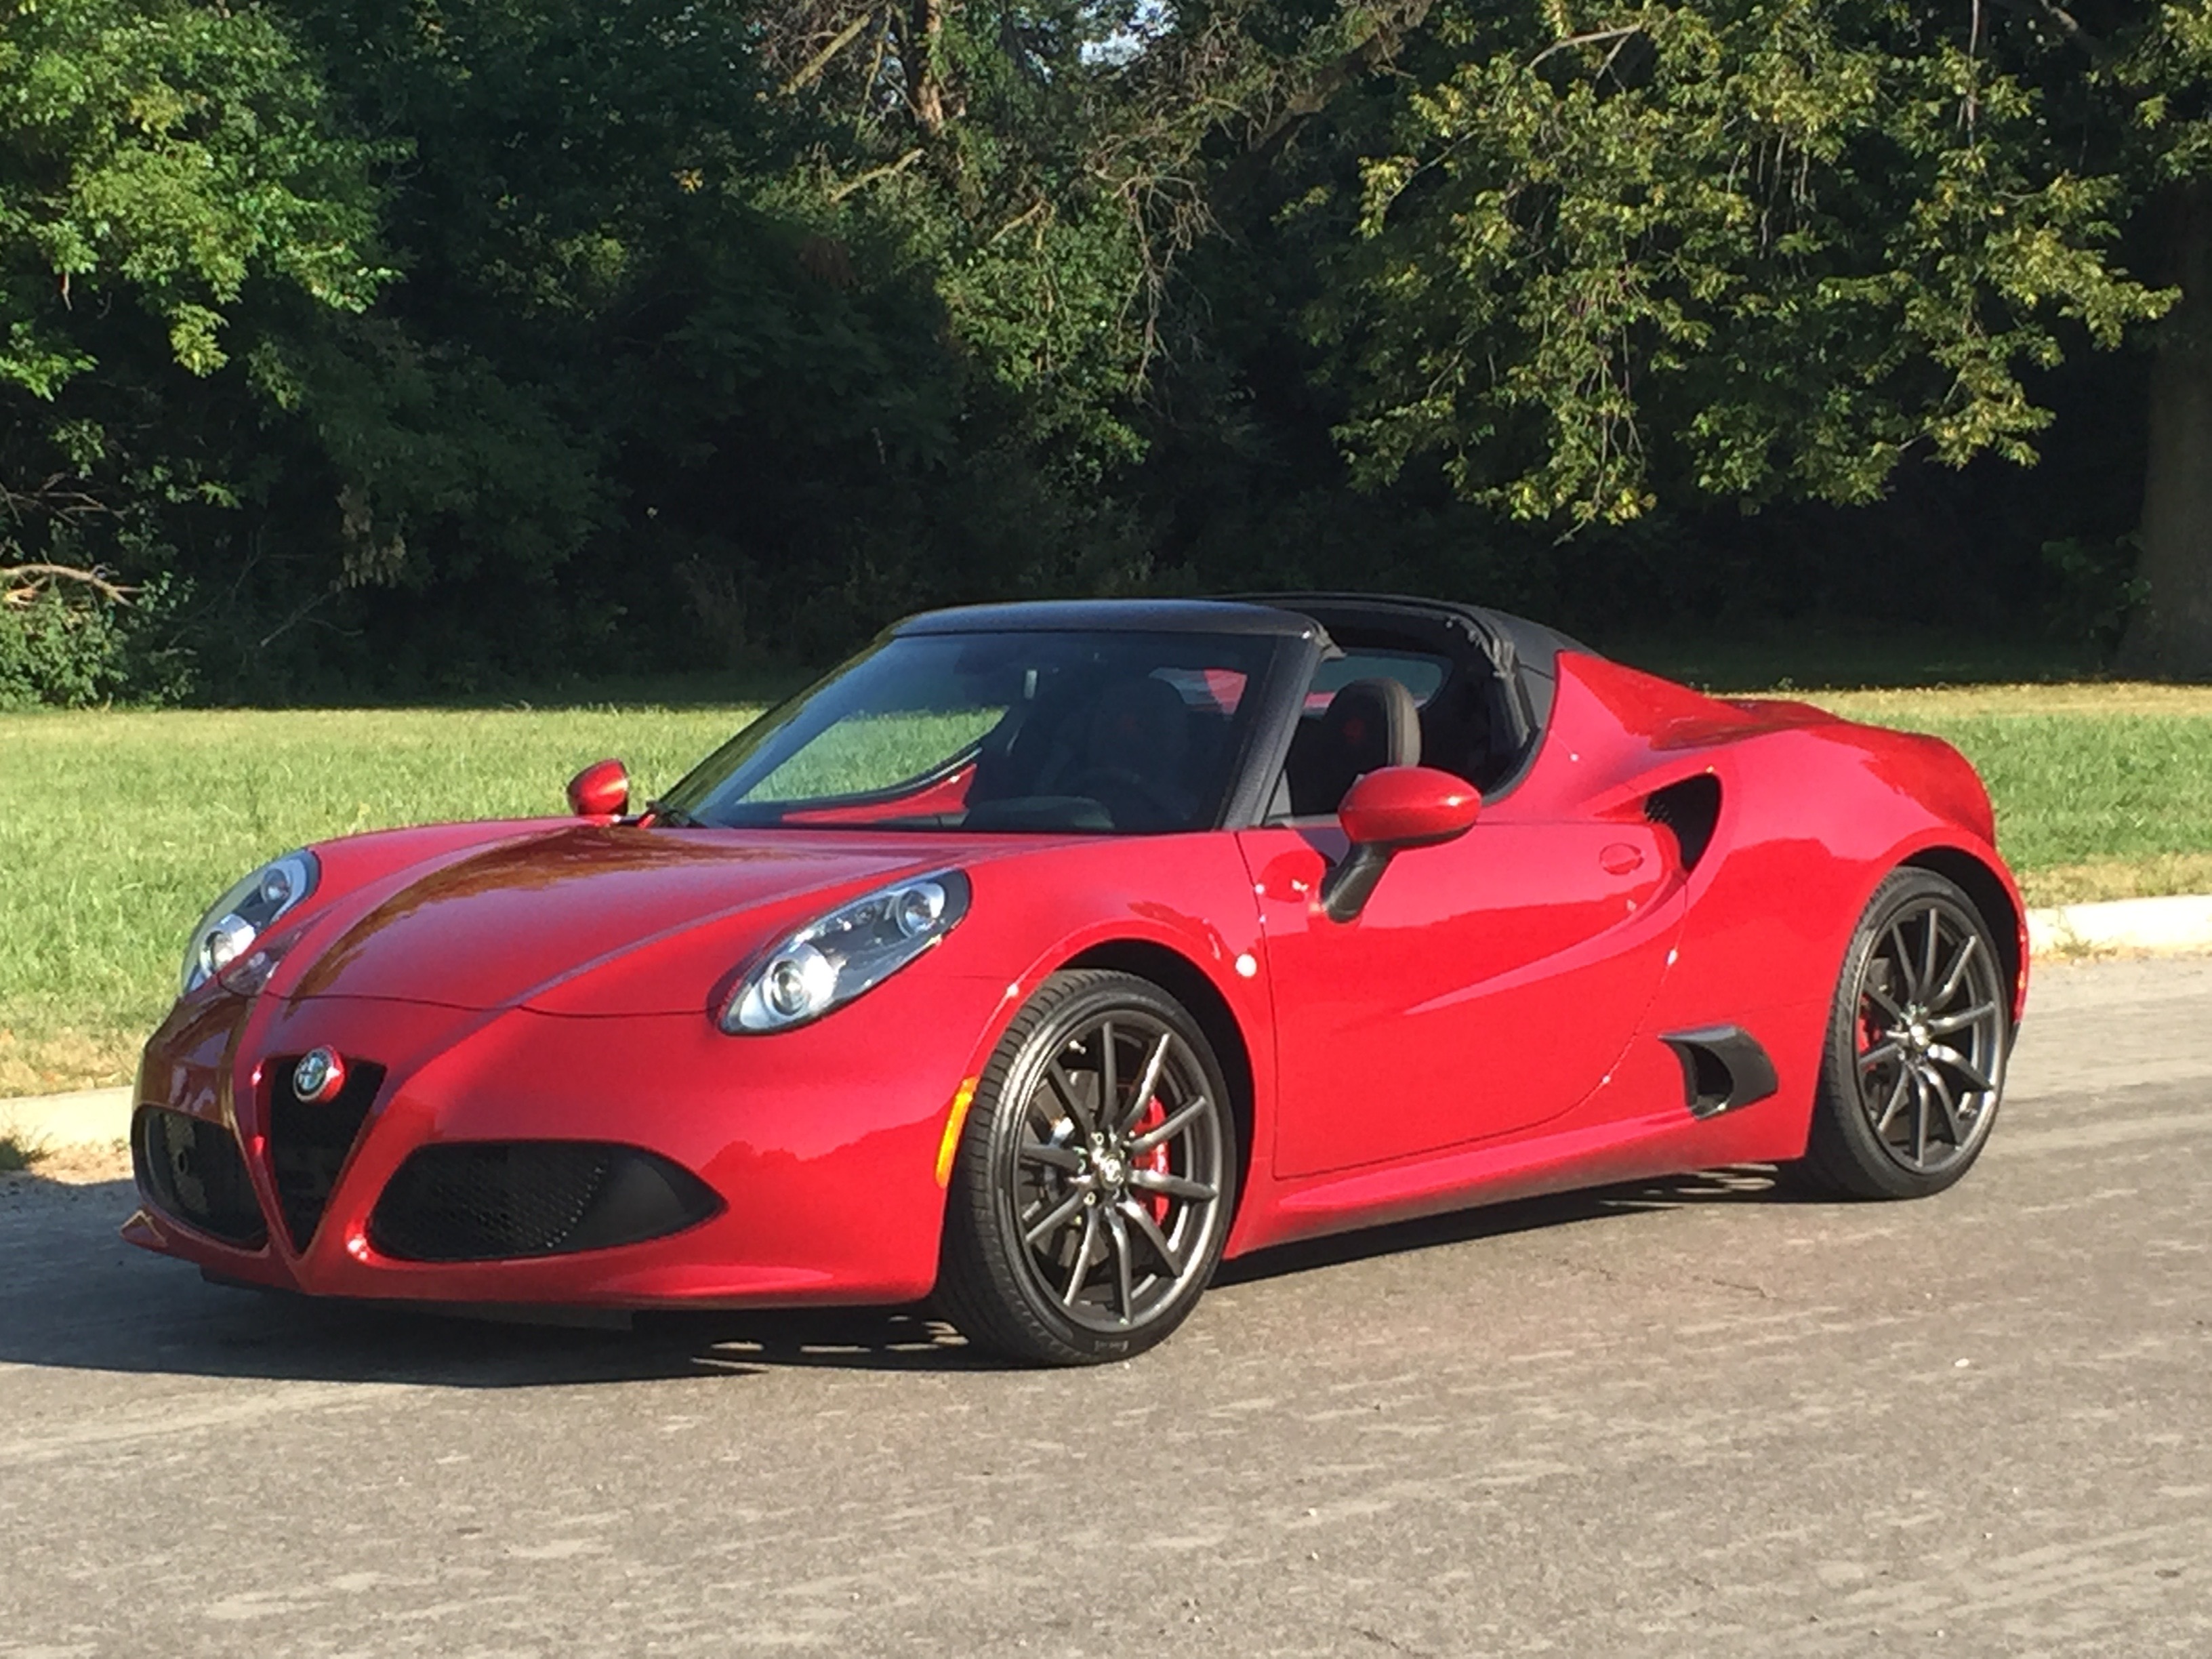 Notes From The Driveway: 2015 Alfa Romeo 4C Spider